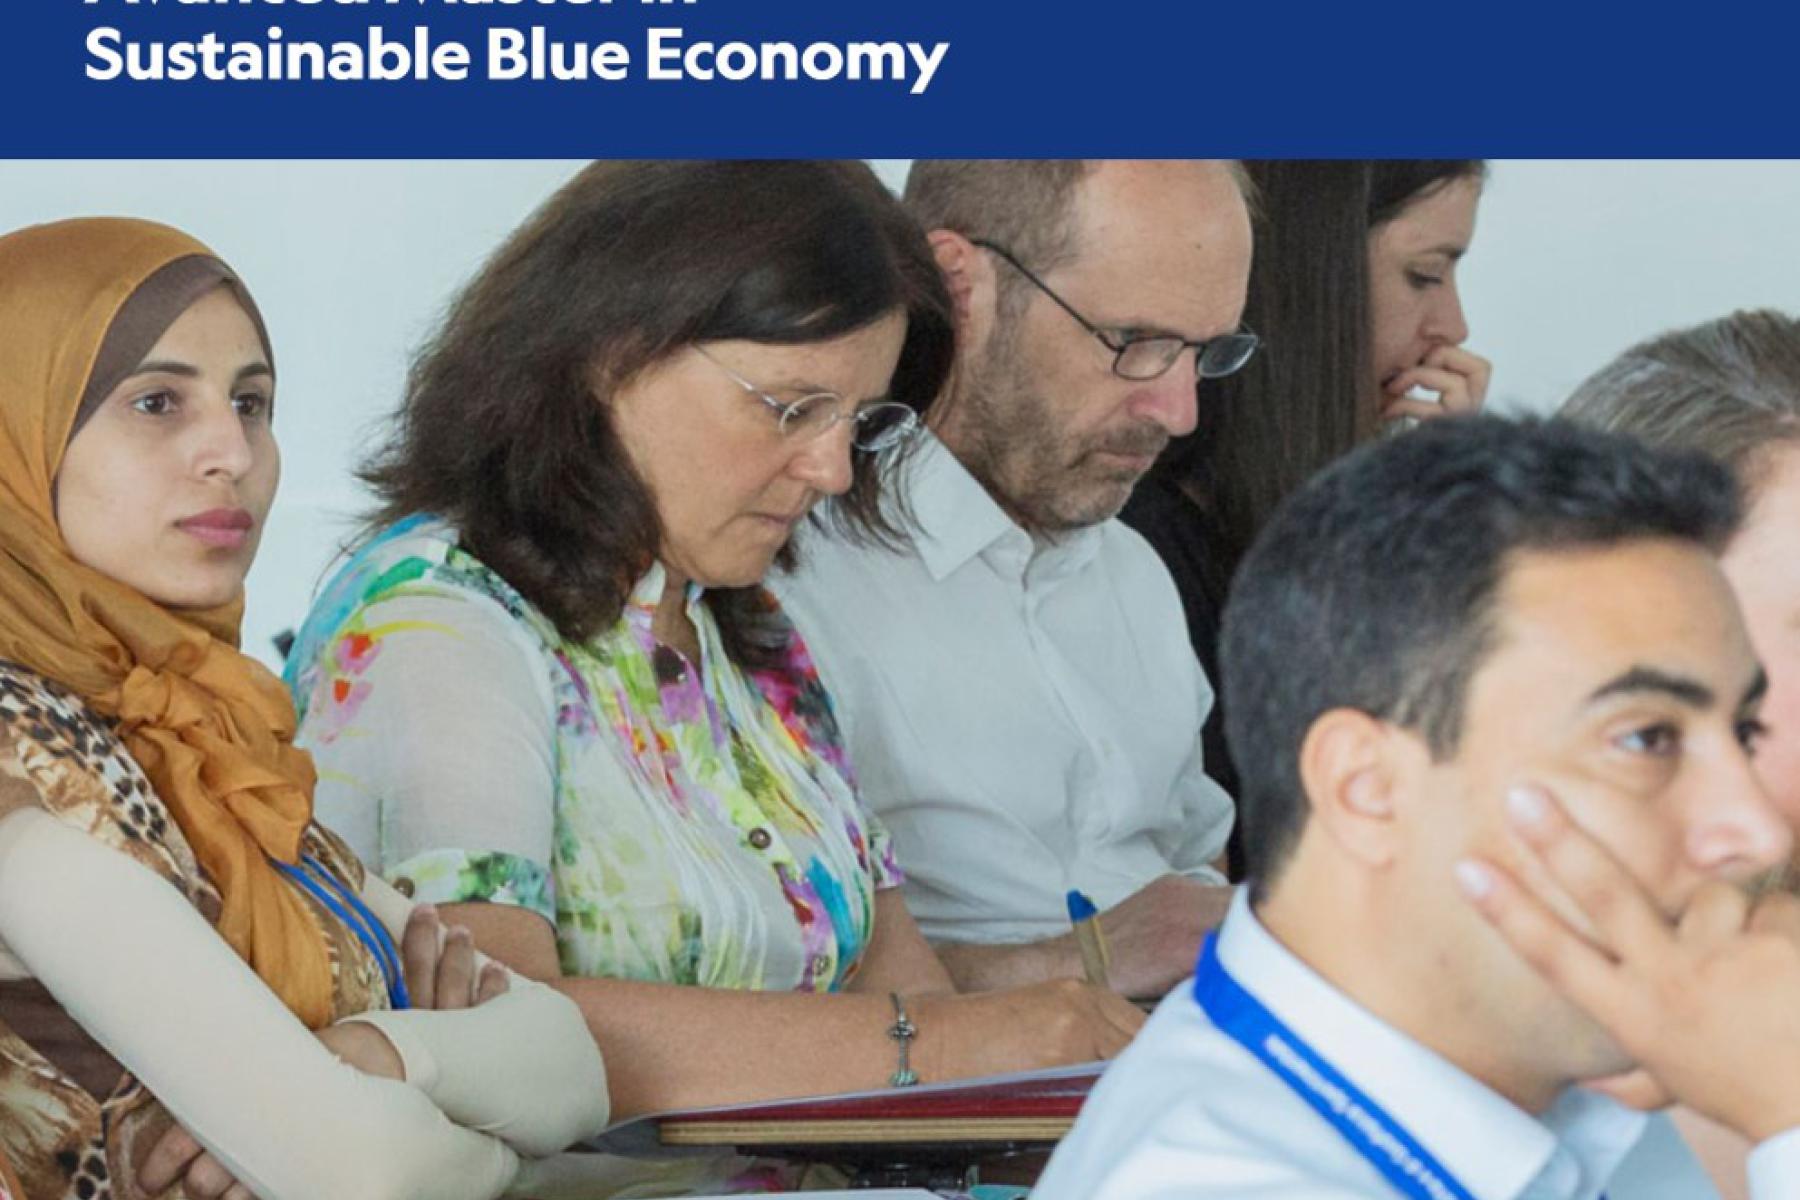 Students attending the Advanced Master in Sustainable Blue Economy